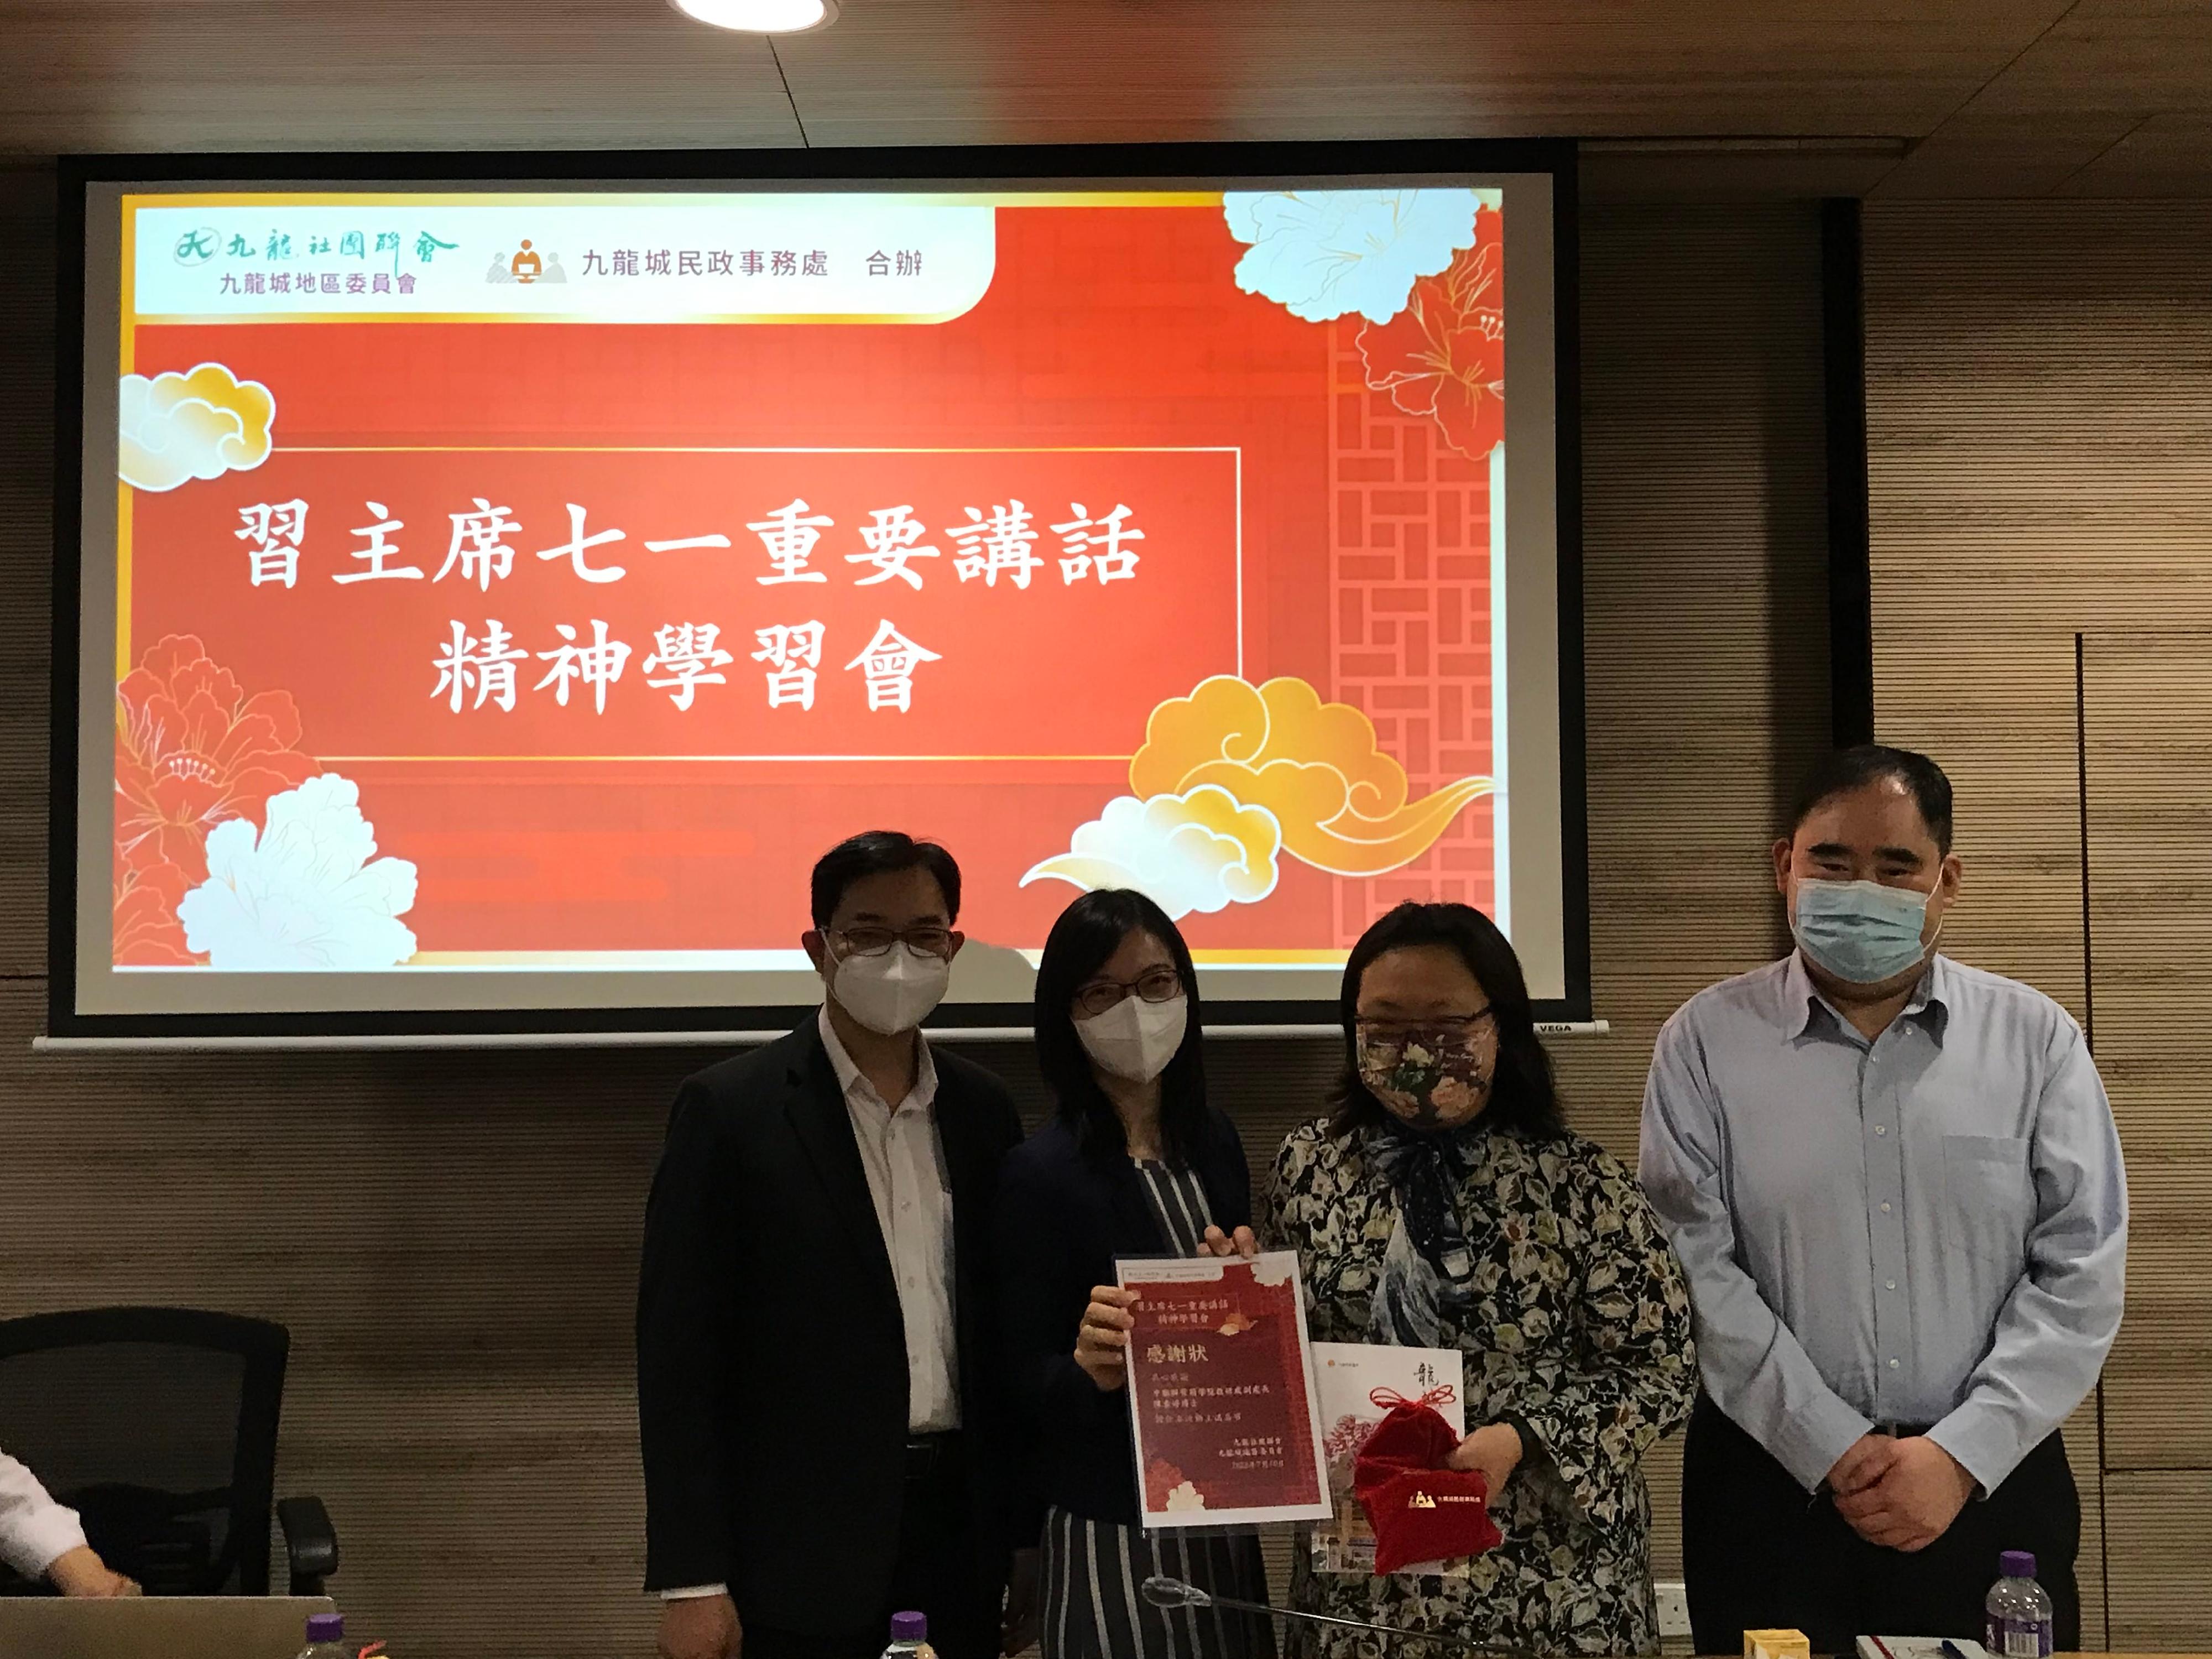 The Kowloon City District Office, together with the Kowloon Federation of Associations Kowloon City District Committee jointly held the "Session to Learn about the Spirit of President Xi's Important Speech" at the Kowloon City Government Offices on July 10. Photo shows the District Officer (Kowloon City), Miss Alice Choi (second right), presenting a certificate of appreciation and souvenirs to the Deputy Director of the Bauhinia Academy of the Liaison Office of the Central People's Government in the HKSAR, Dr Chen Suting (second left). 